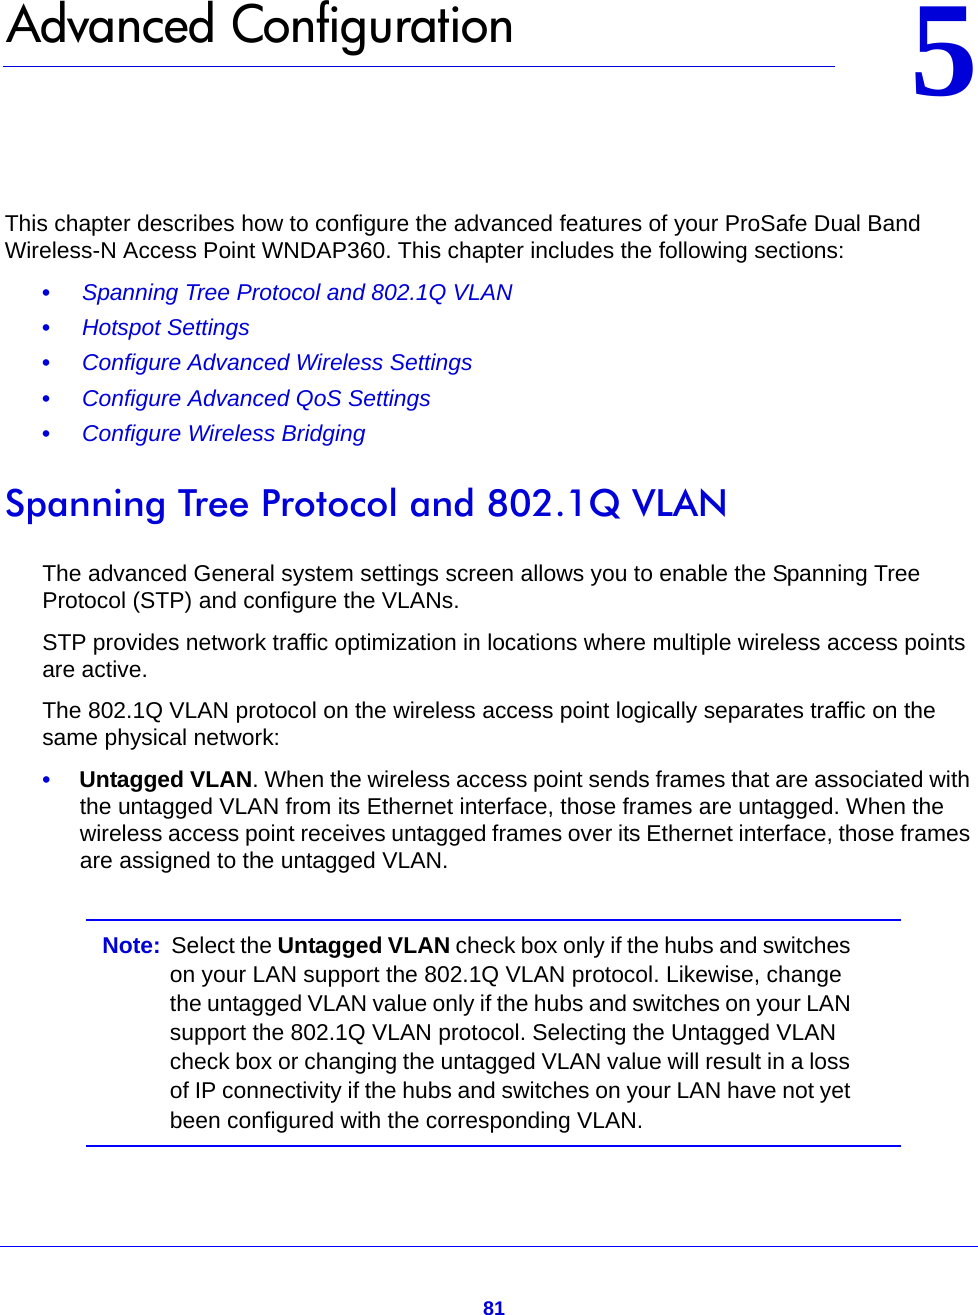 8155.   Advanced ConfigurationThis chapter describes how to configure the advanced features of your ProSafe Dual Band Wireless-N Access Point WNDAP360. This chapter includes the following sections:•     Spanning Tree Protocol and 802.1Q VLAN •     Hotspot Settings •     Configure Advanced Wireless Settings •     Configure Advanced QoS Settings •     Configure Wireless Bridging Spanning Tree Protocol and 802.1Q VLANThe advanced General system settings screen allows you to enable the Spanning Tree Protocol (STP) and configure the VLANs.STP provides network traffic optimization in locations where multiple wireless access points are active.The 802.1Q VLAN protocol on the wireless access point logically separates traffic on the same physical network:•     Untagged VLAN. When the wireless access point sends frames that are associated with the untagged VLAN from its Ethernet interface, those frames are untagged. When the wireless access point receives untagged frames over its Ethernet interface, those frames are assigned to the untagged VLAN.Note:  Select the Untagged VLAN check box only if the hubs and switches on your LAN support the 802.1Q VLAN protocol. Likewise, change the untagged VLAN value only if the hubs and switches on your LAN support the 802.1Q VLAN protocol. Selecting the Untagged VLAN check box or changing the untagged VLAN value will result in a loss of IP connectivity if the hubs and switches on your LAN have not yet been configured with the corresponding VLAN.